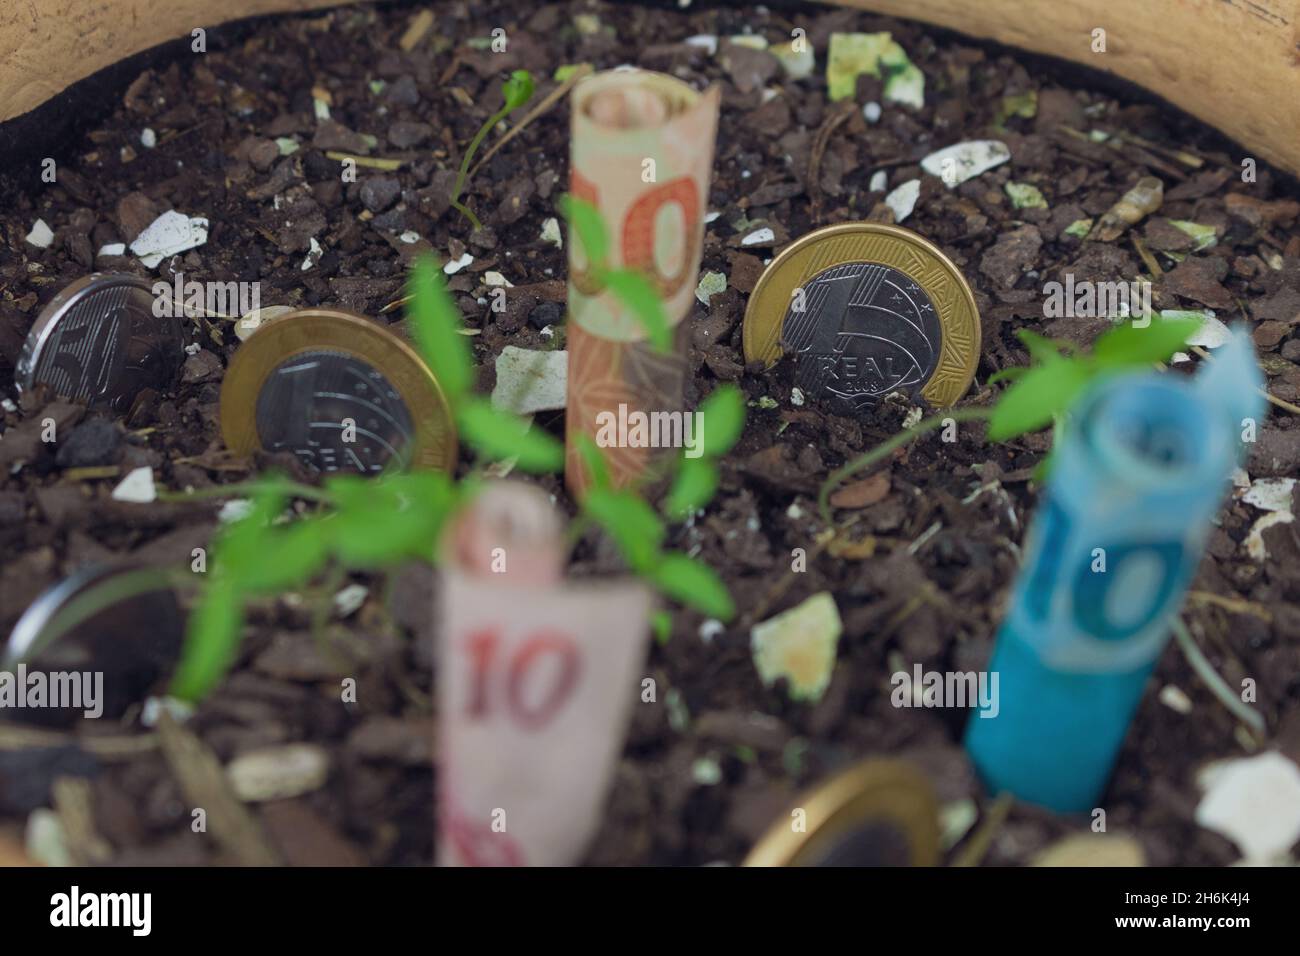 Brazilian money buried in a vase with seedlings. Stock Photo